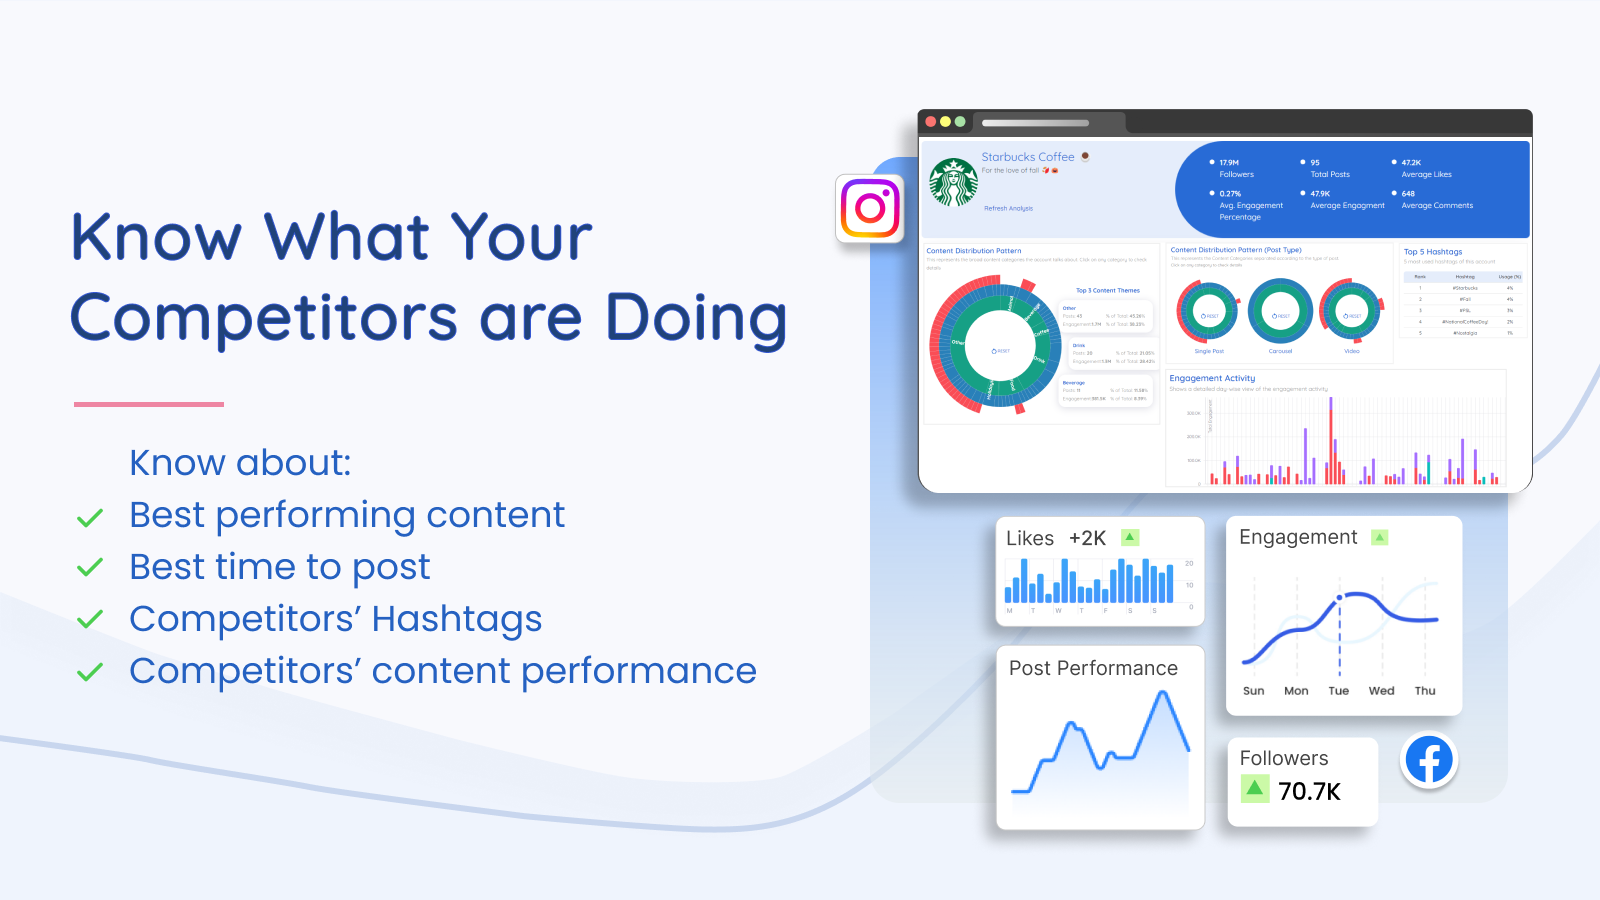 Know about the best performing content of your competitor